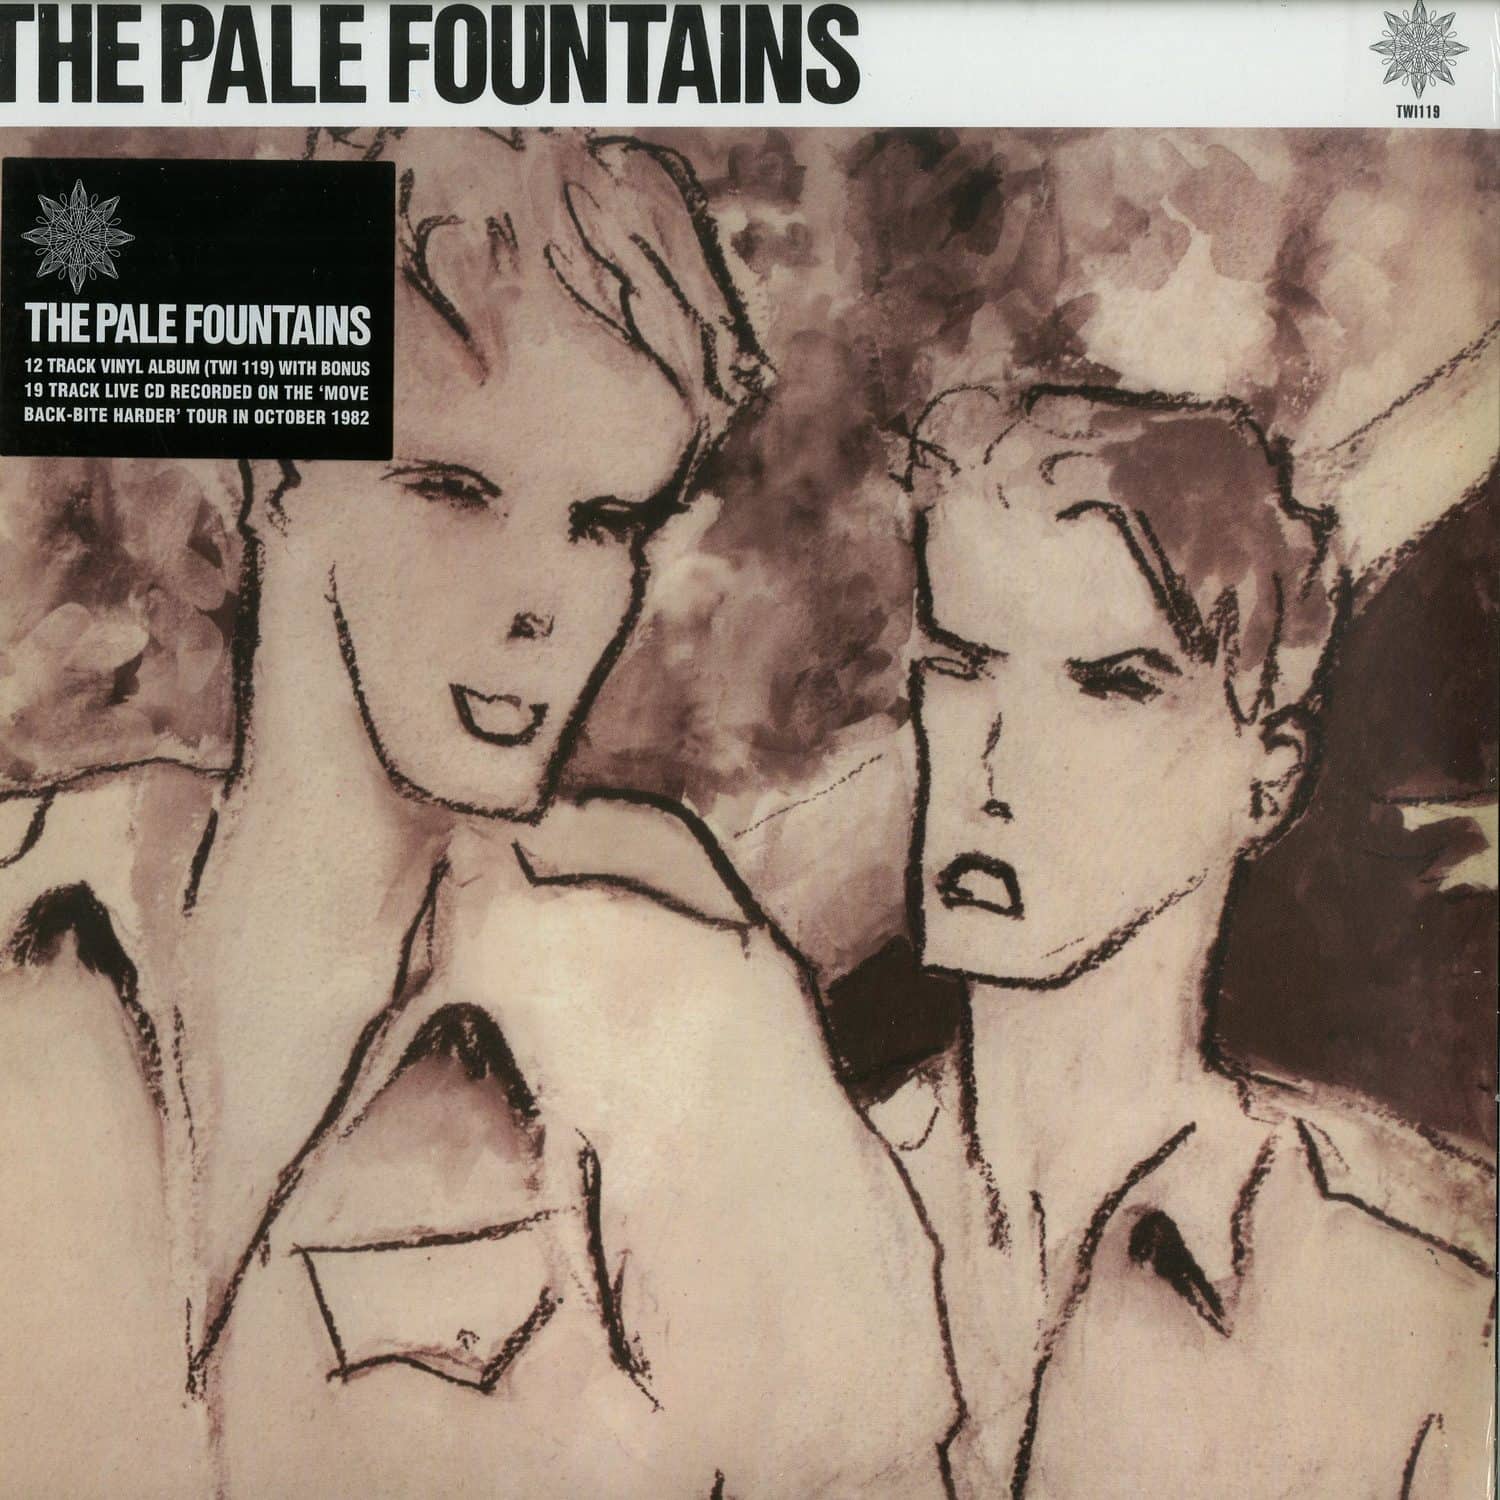 The Pale Fountains - SOMETHING ON MY MIND 